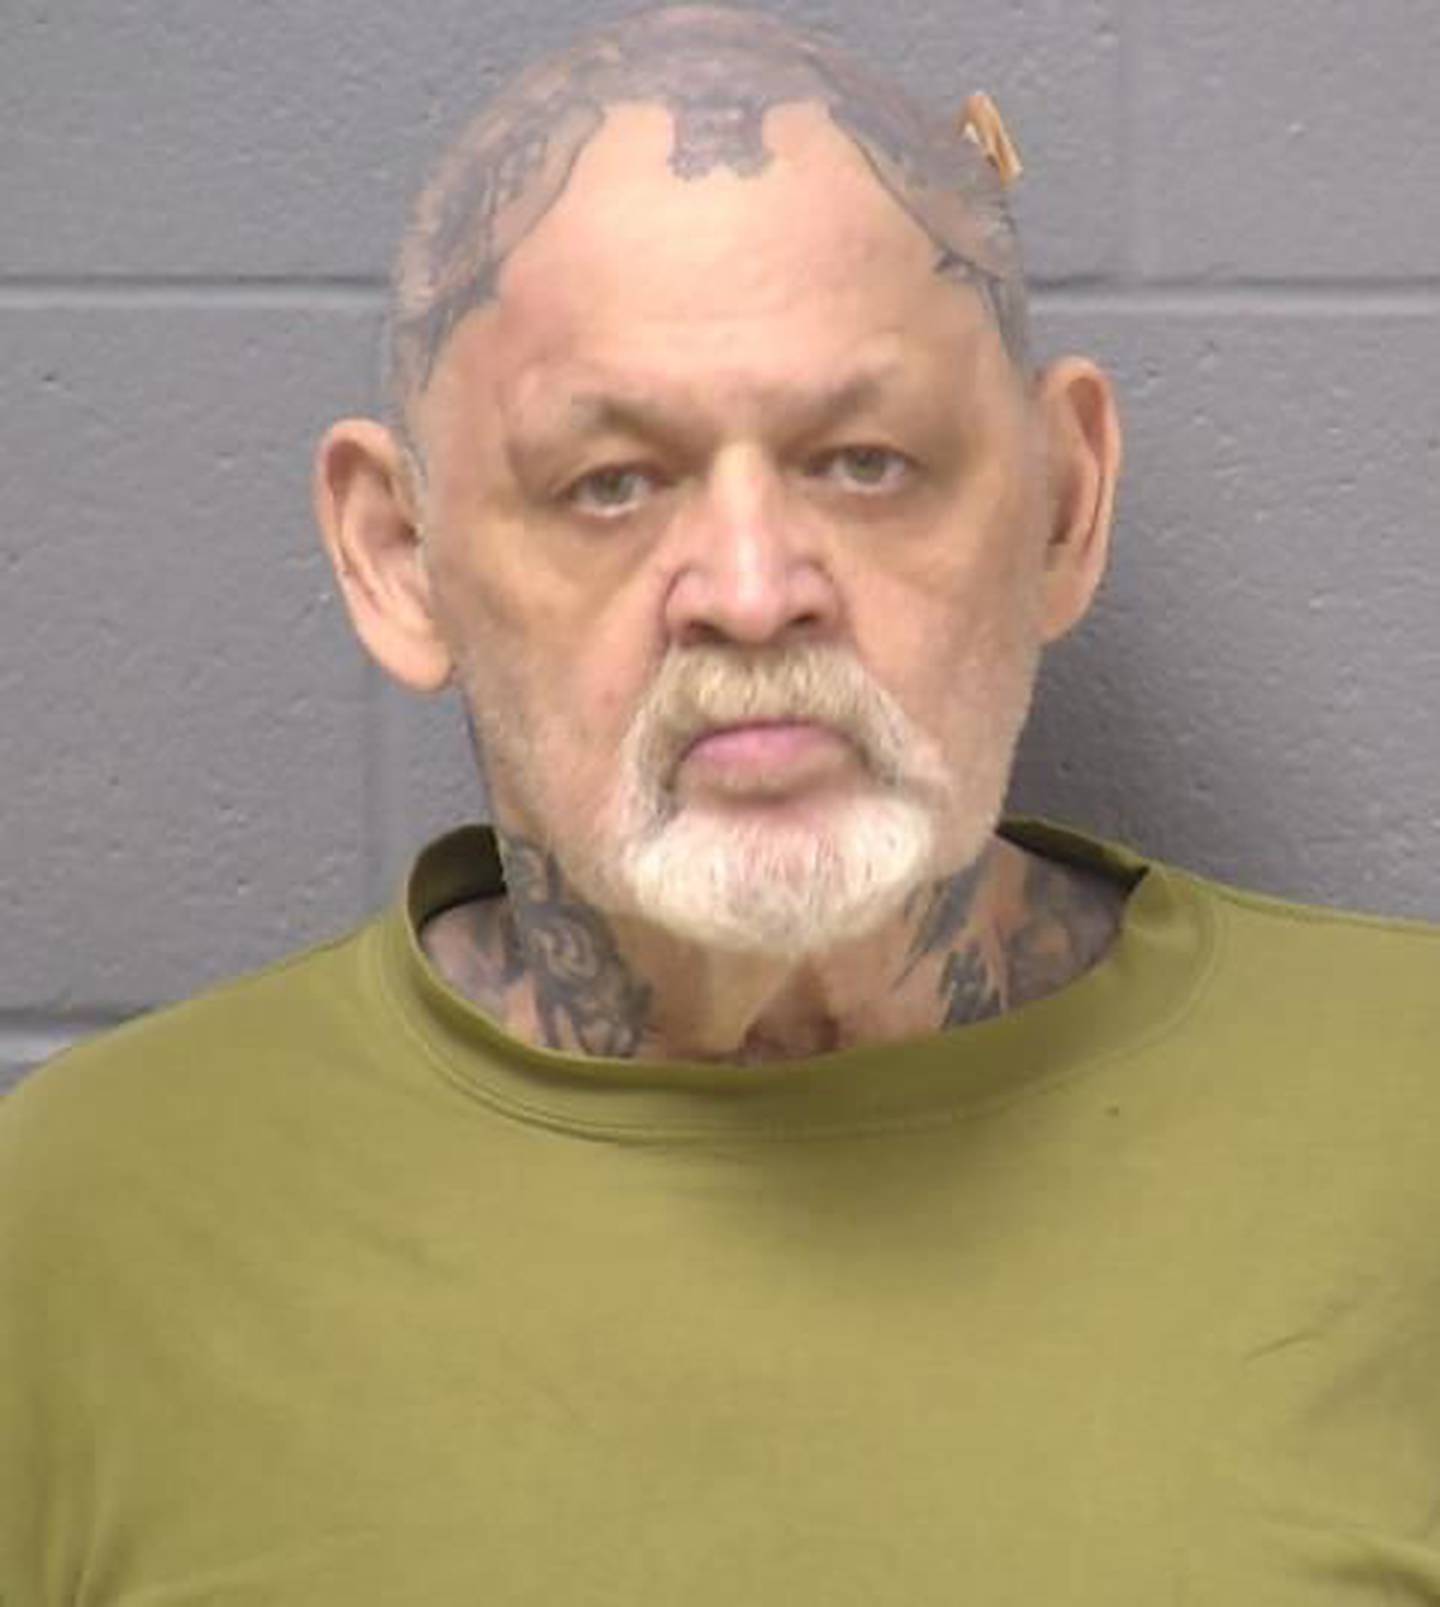 John Shadbar, 70, of Lockport Township has been charged with attempted murder and unlawful use of a firearm by a felon after allegedly shooting his neighbor on May 7.